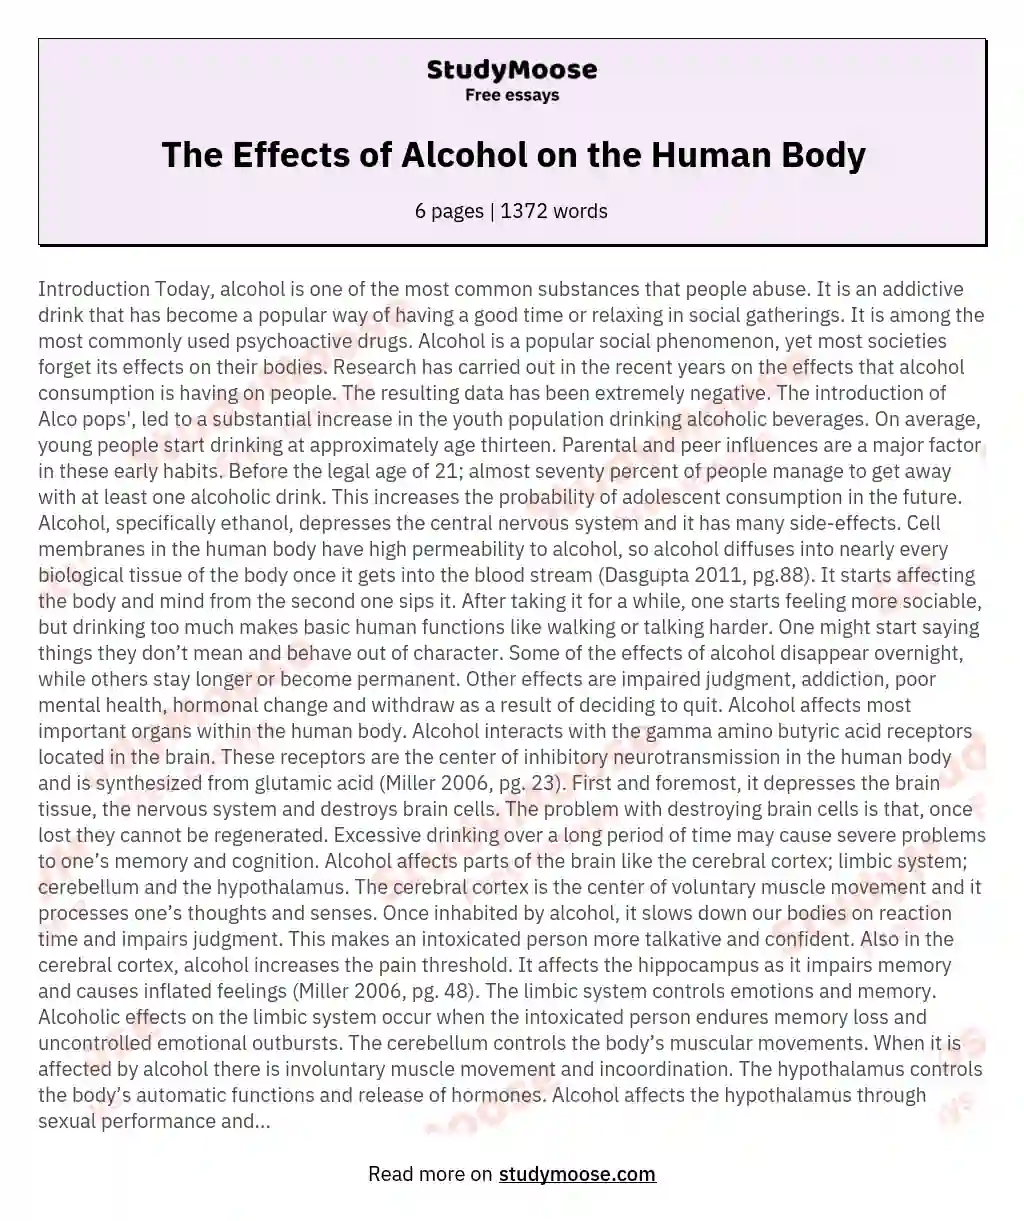 The Effects of Alcohol on the Human Body